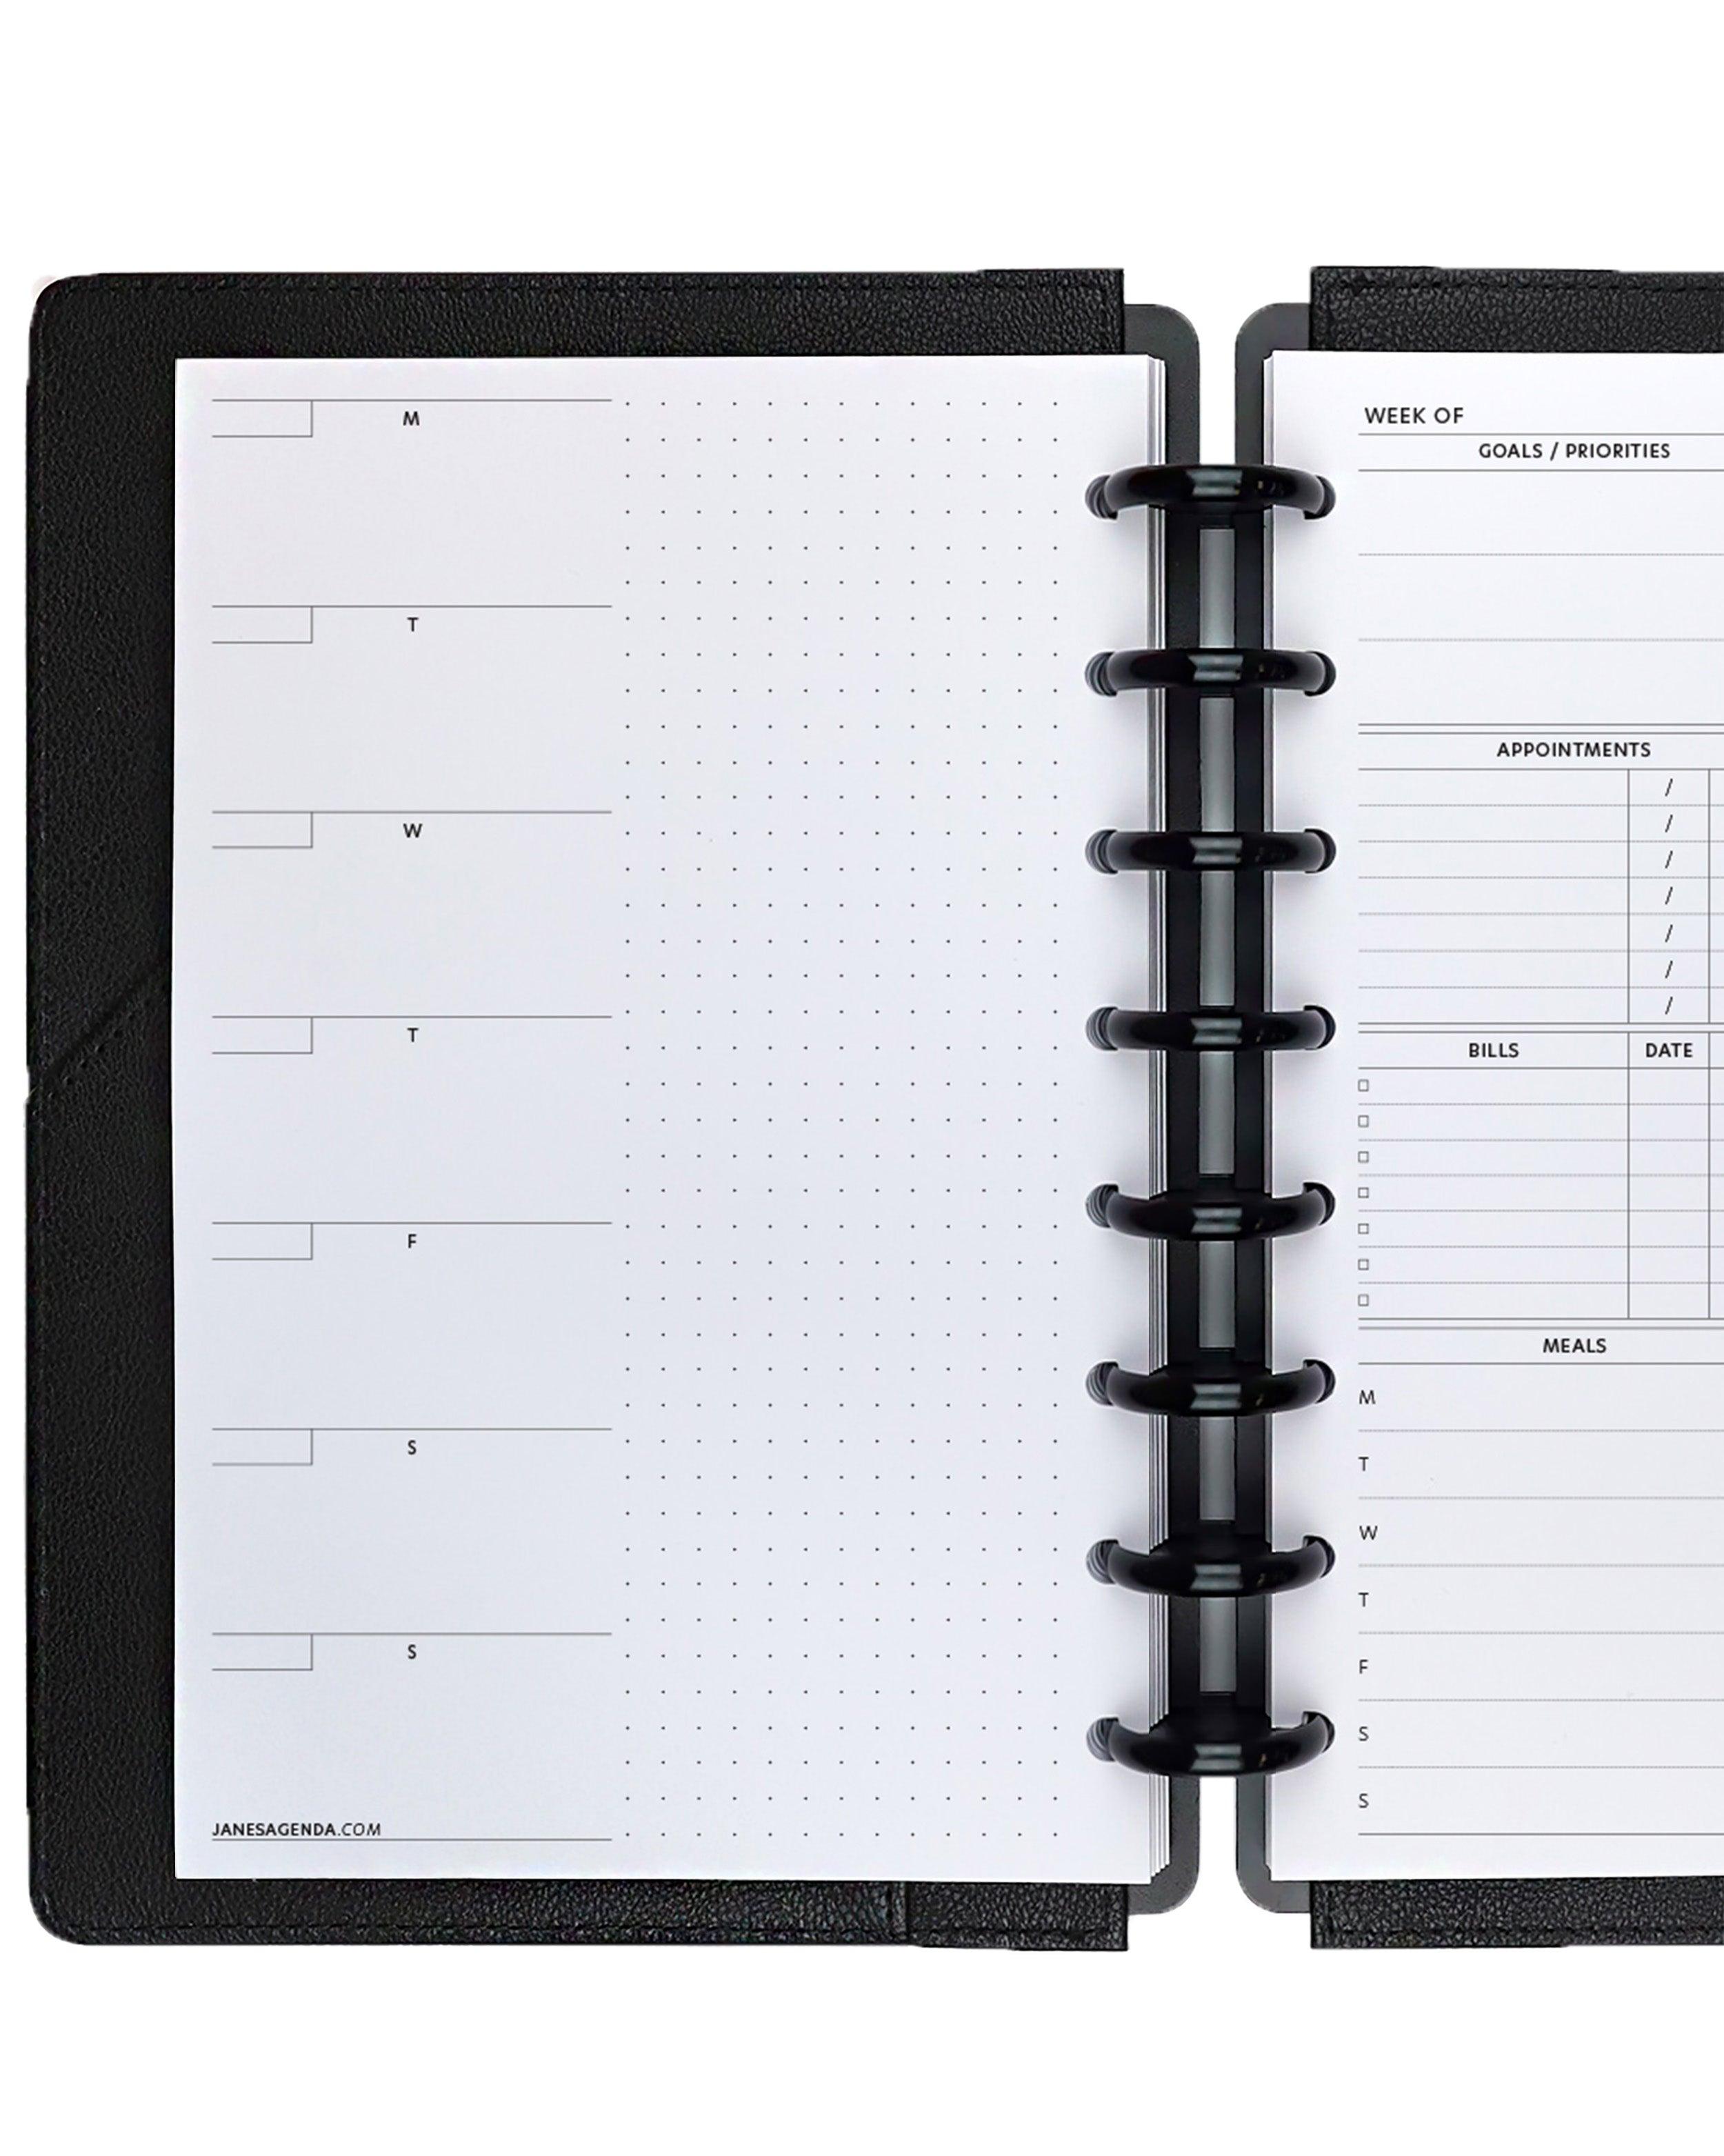 Daily Planner Refill Pages, Undated